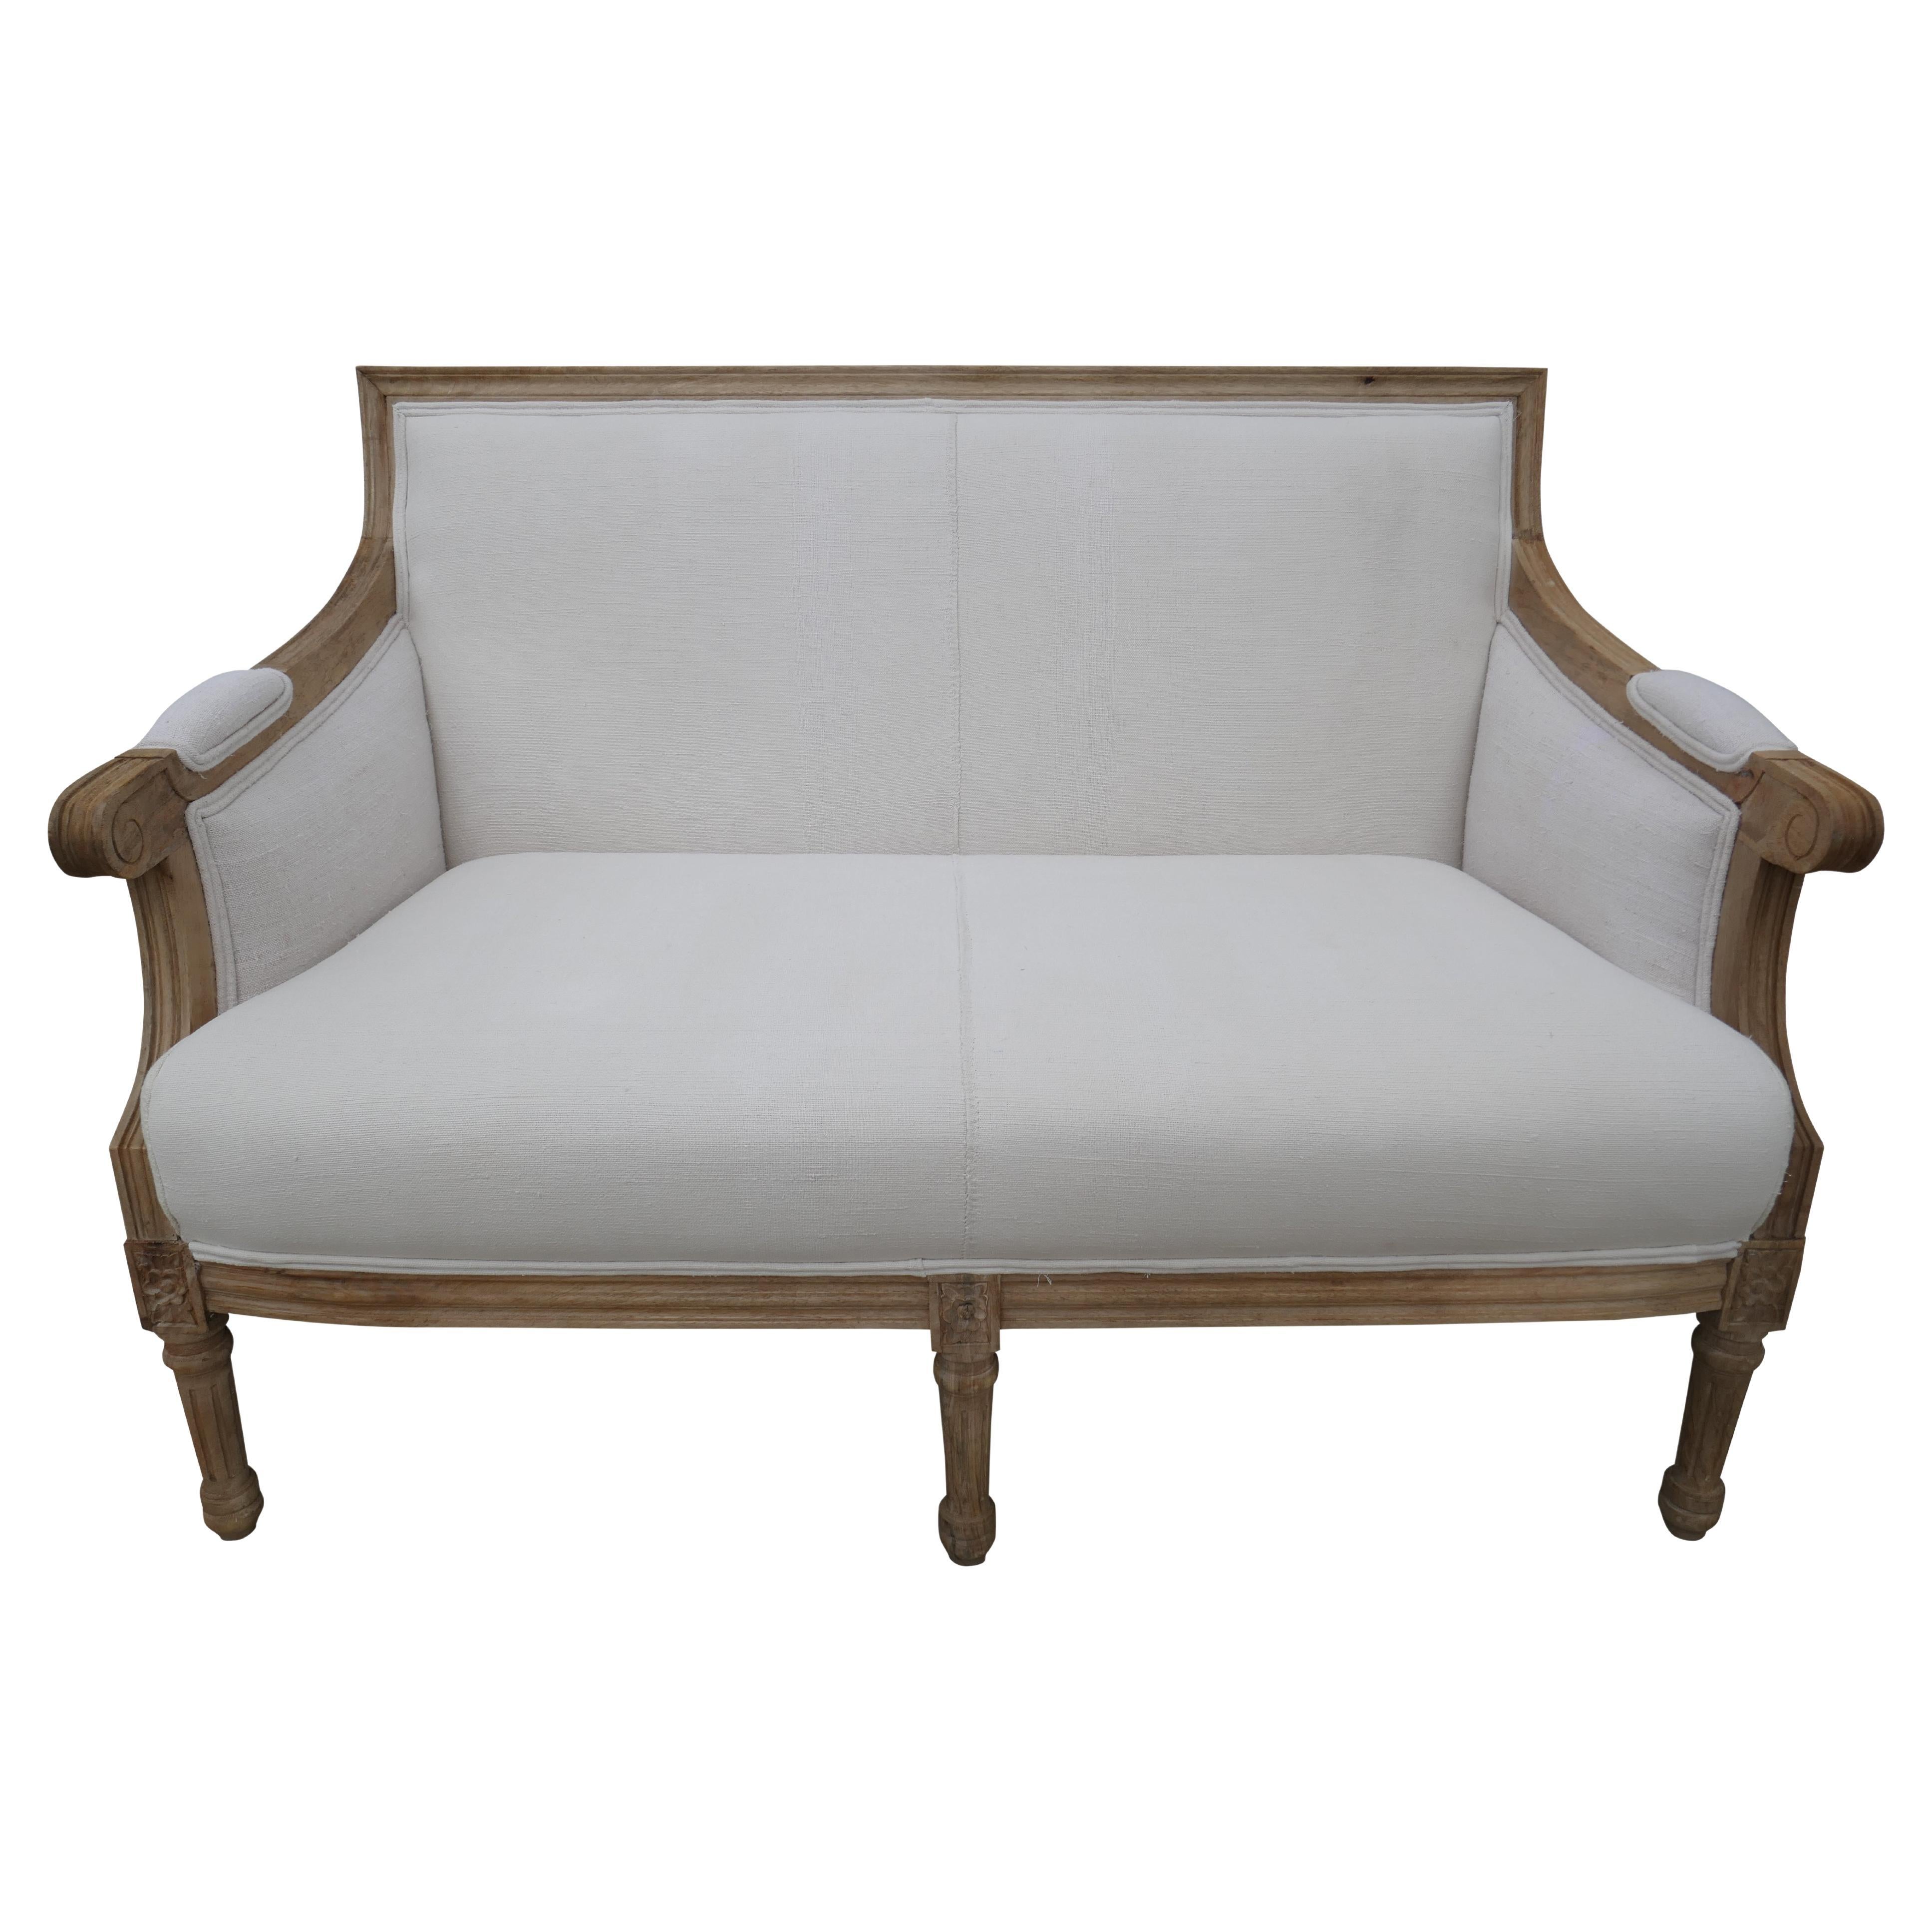 Carved Settee in Vintage French Hand-Spun Natural Linen